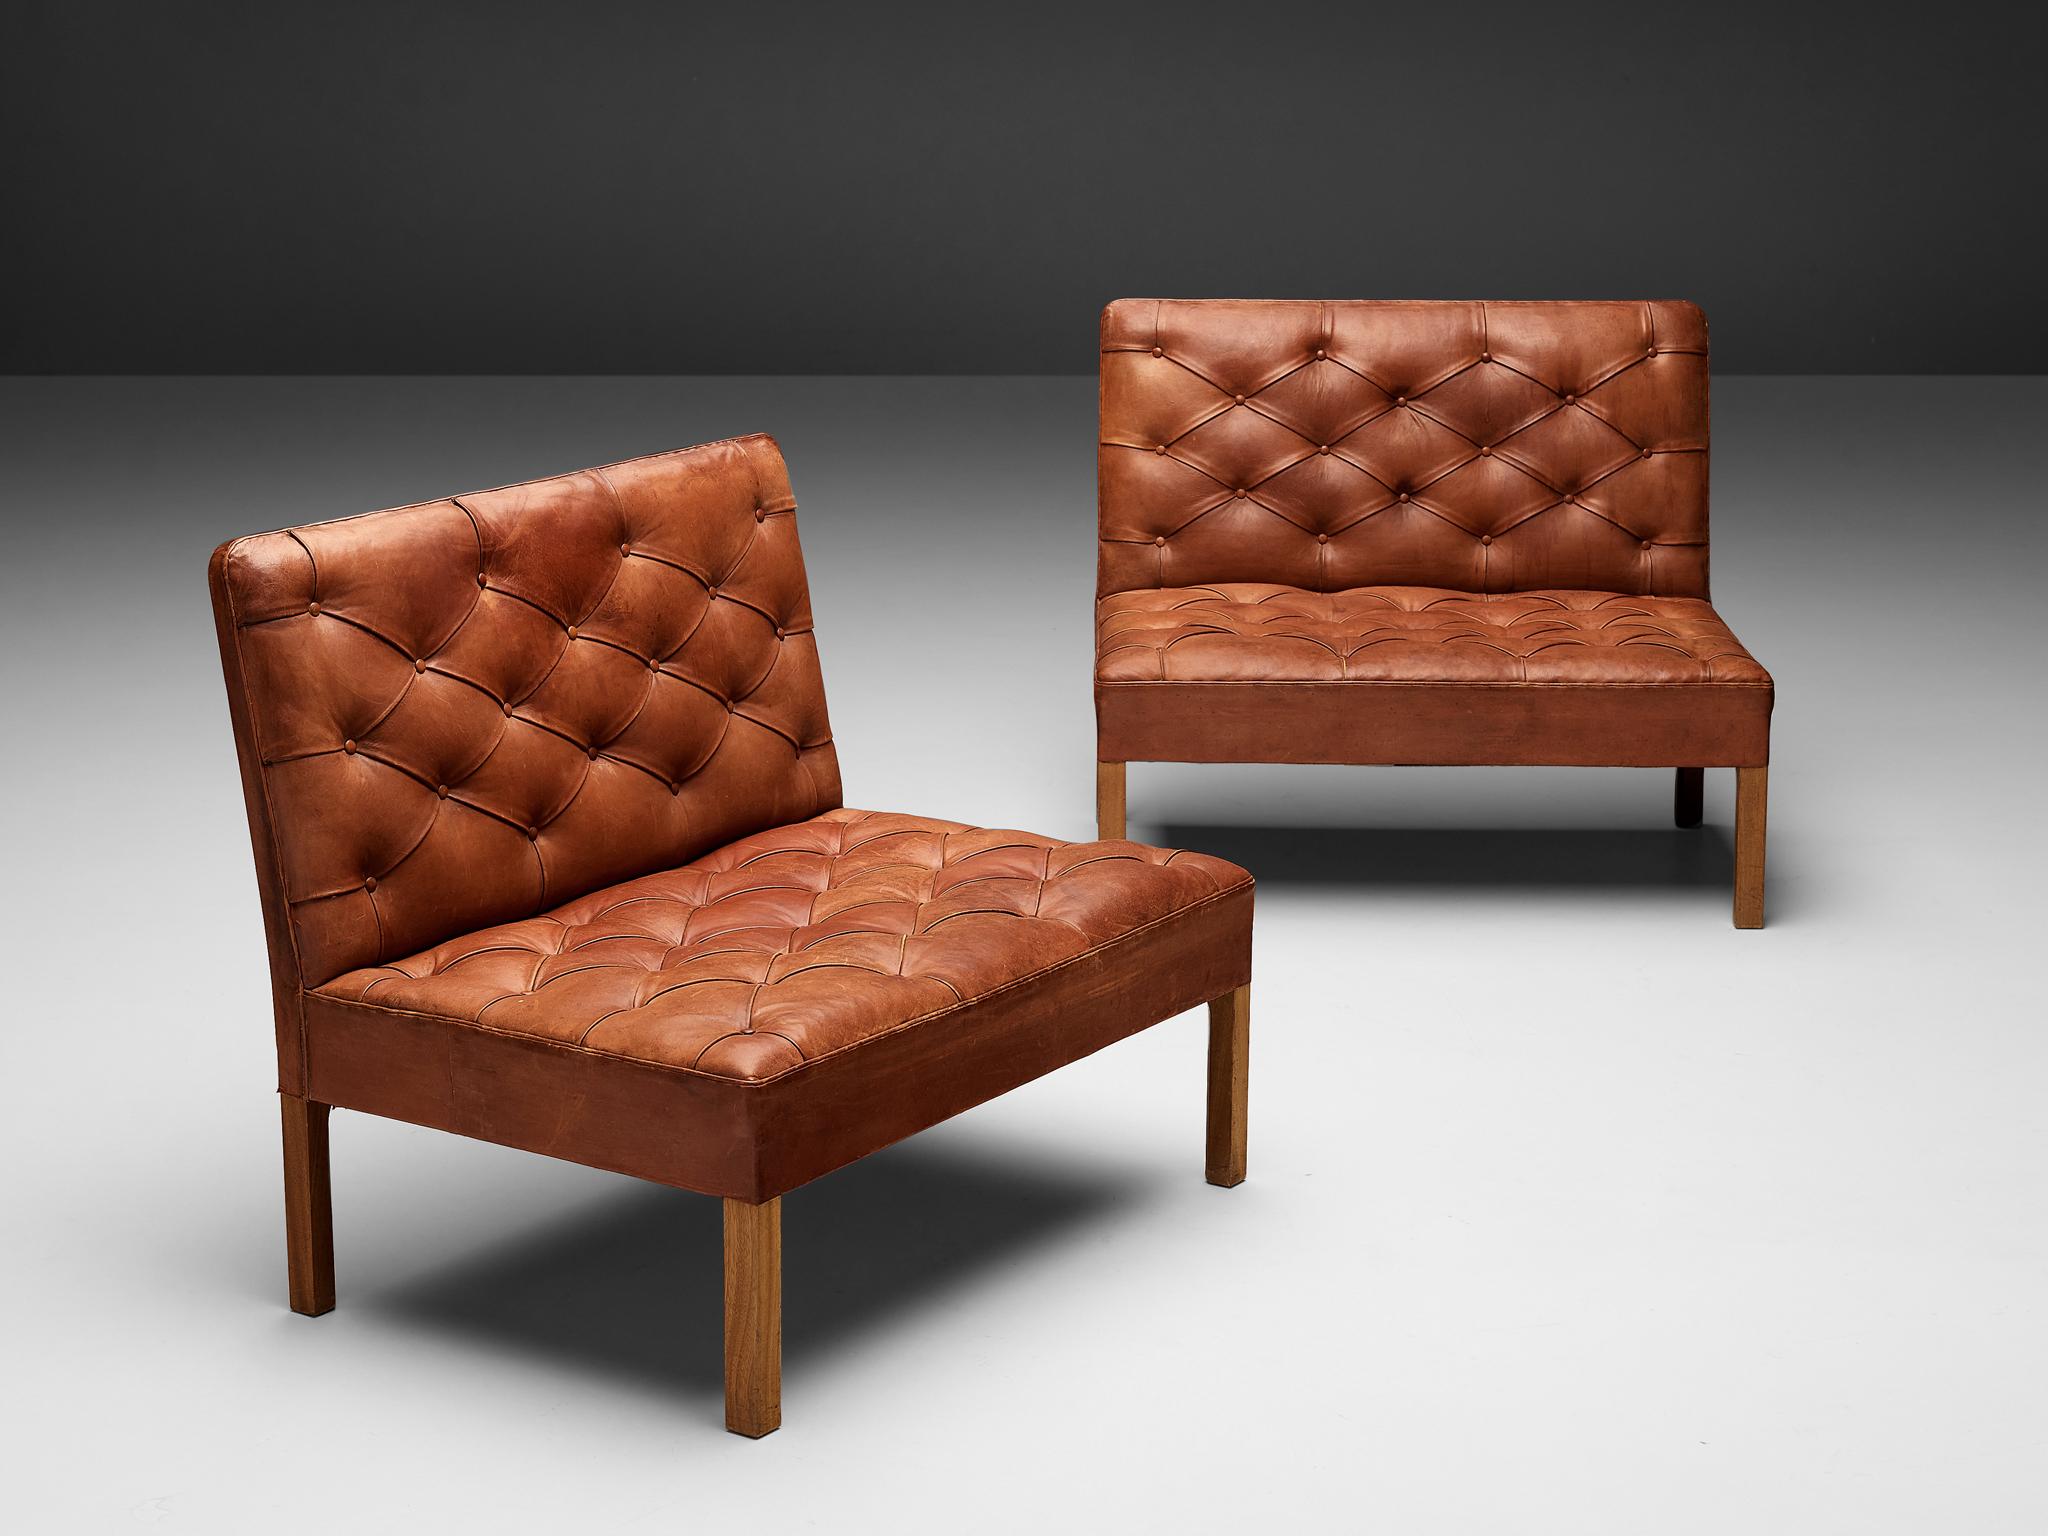 Kaare Klint for Rud Rasmussen, set of two lounge chairs model 4698, original leather, oak, Denmark, design 1933, production 1970s

This pair of lounge chairs is one of the most iconic designs by Kaare Klint. Both the seat and back are upholstered